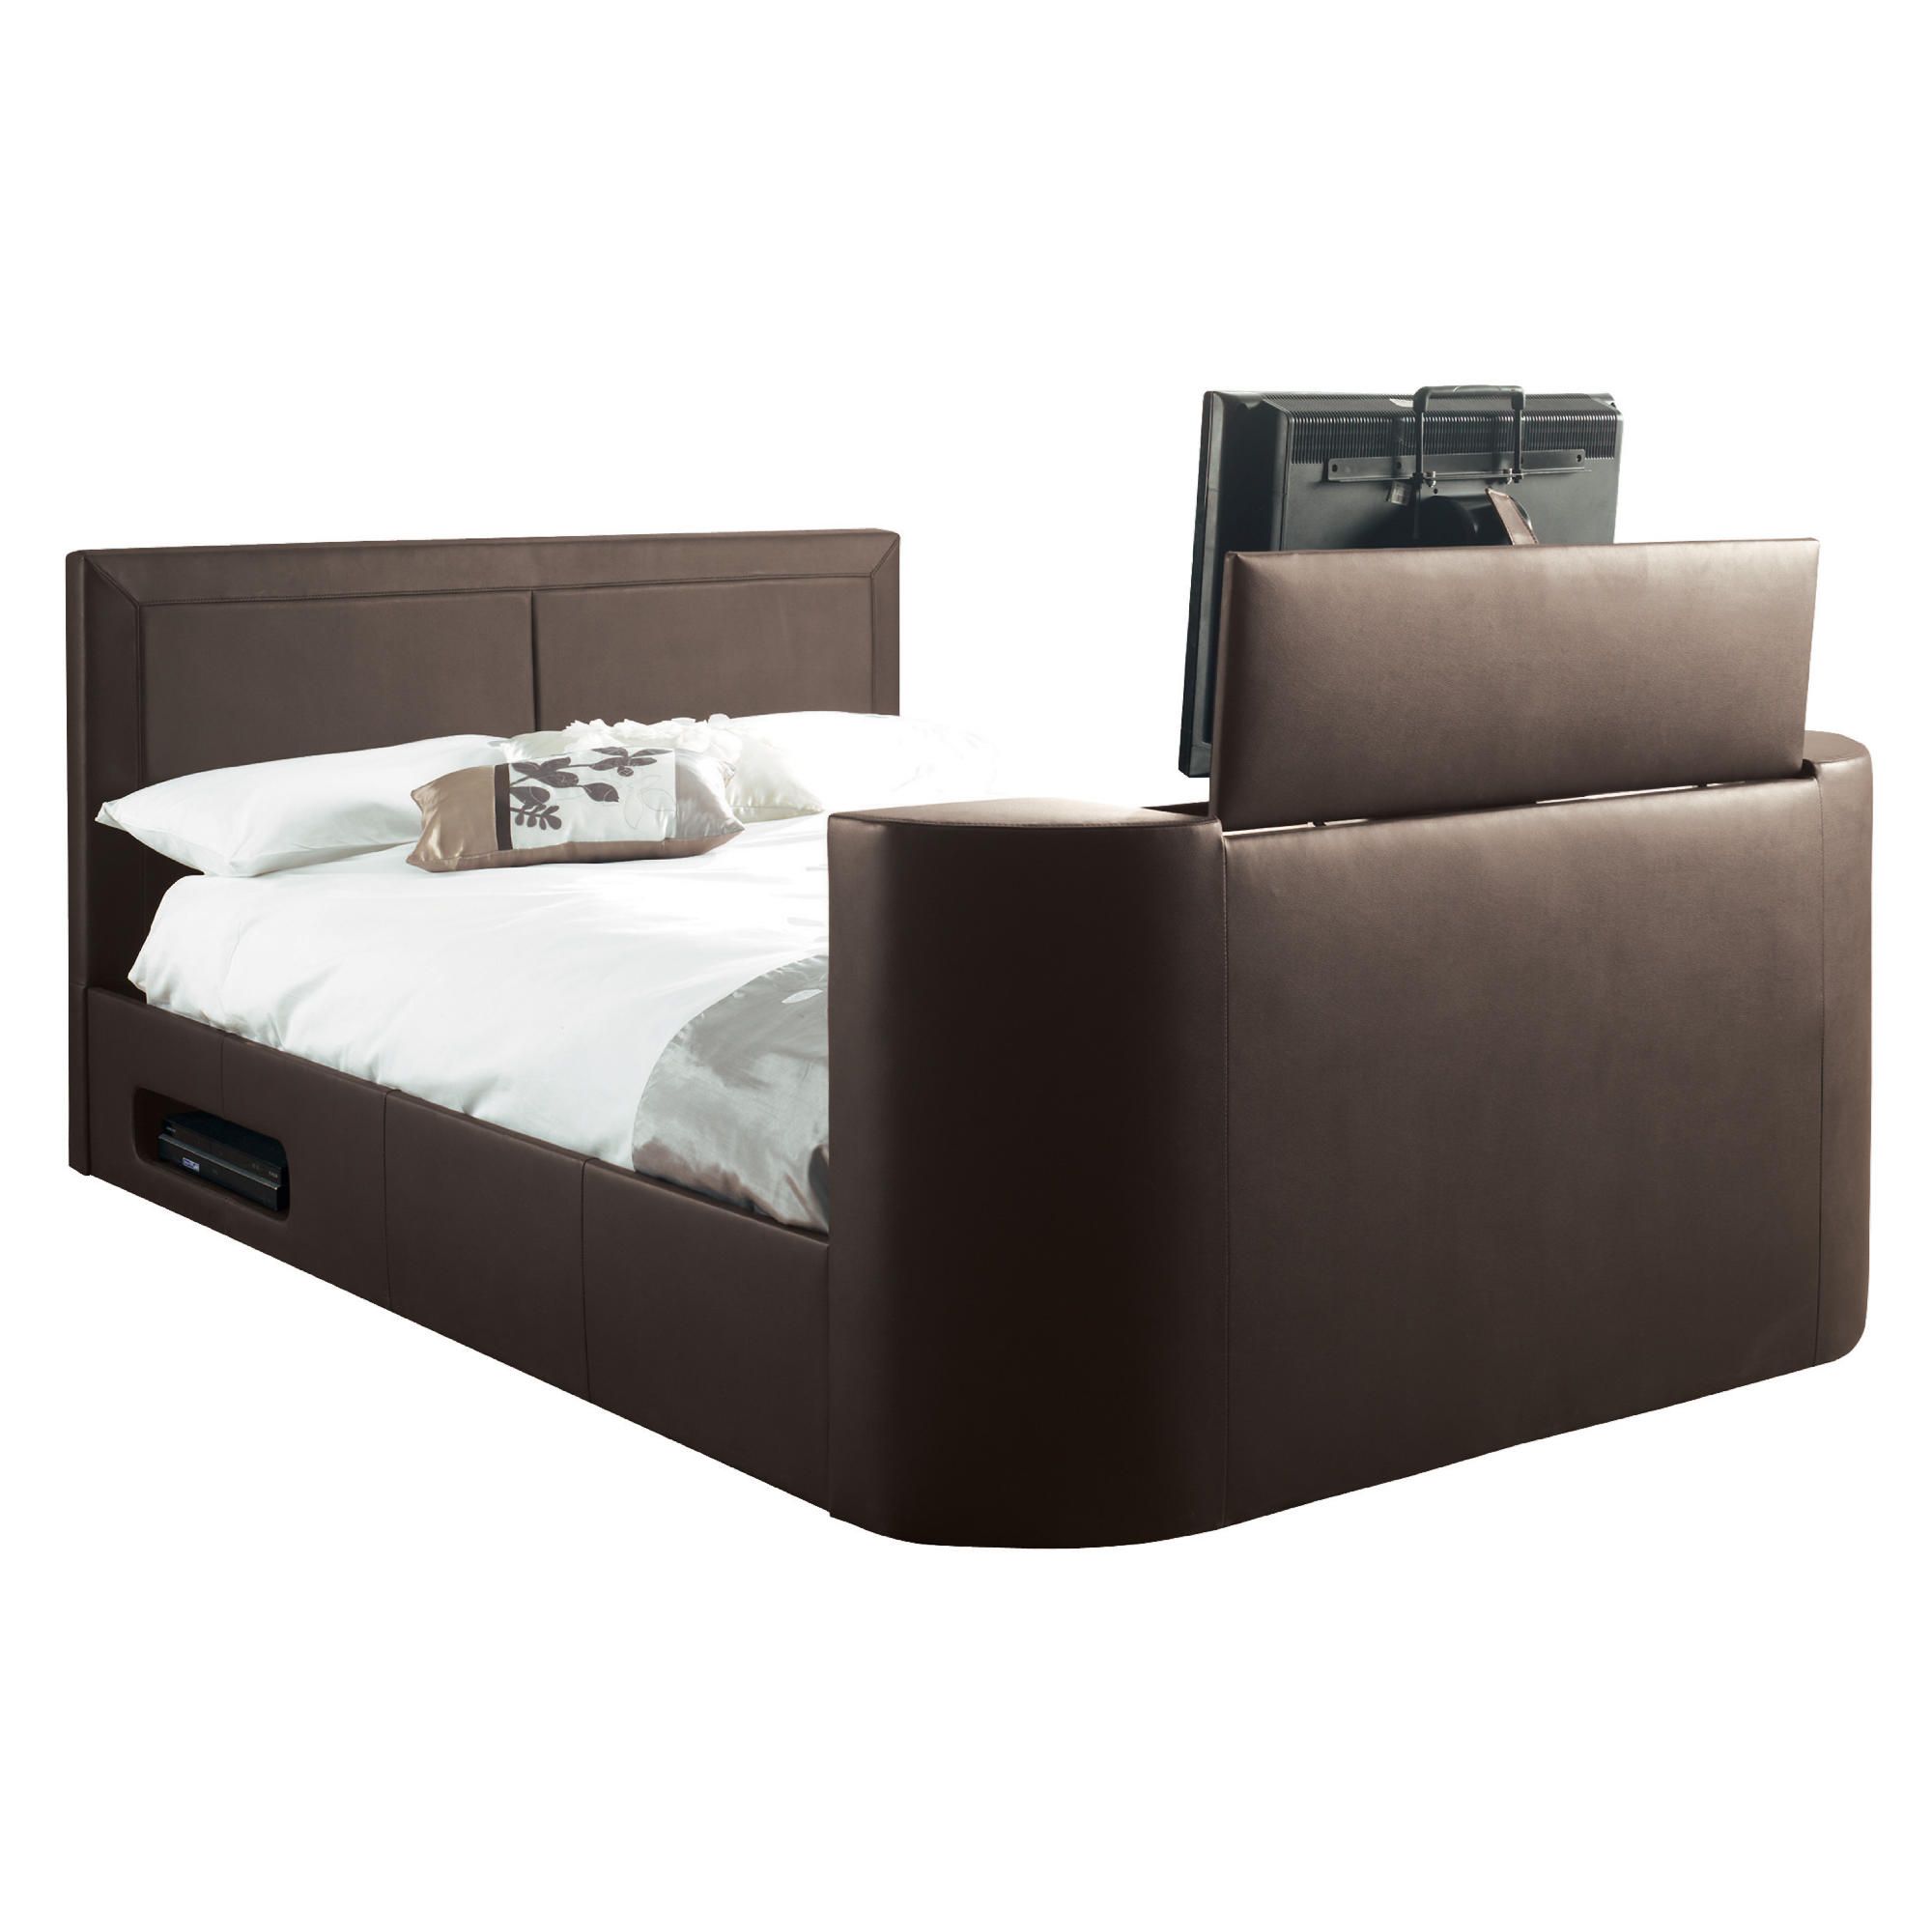 Charlotte Superking Gas Lift Tv Bed Frame, Brown at Tesco Direct